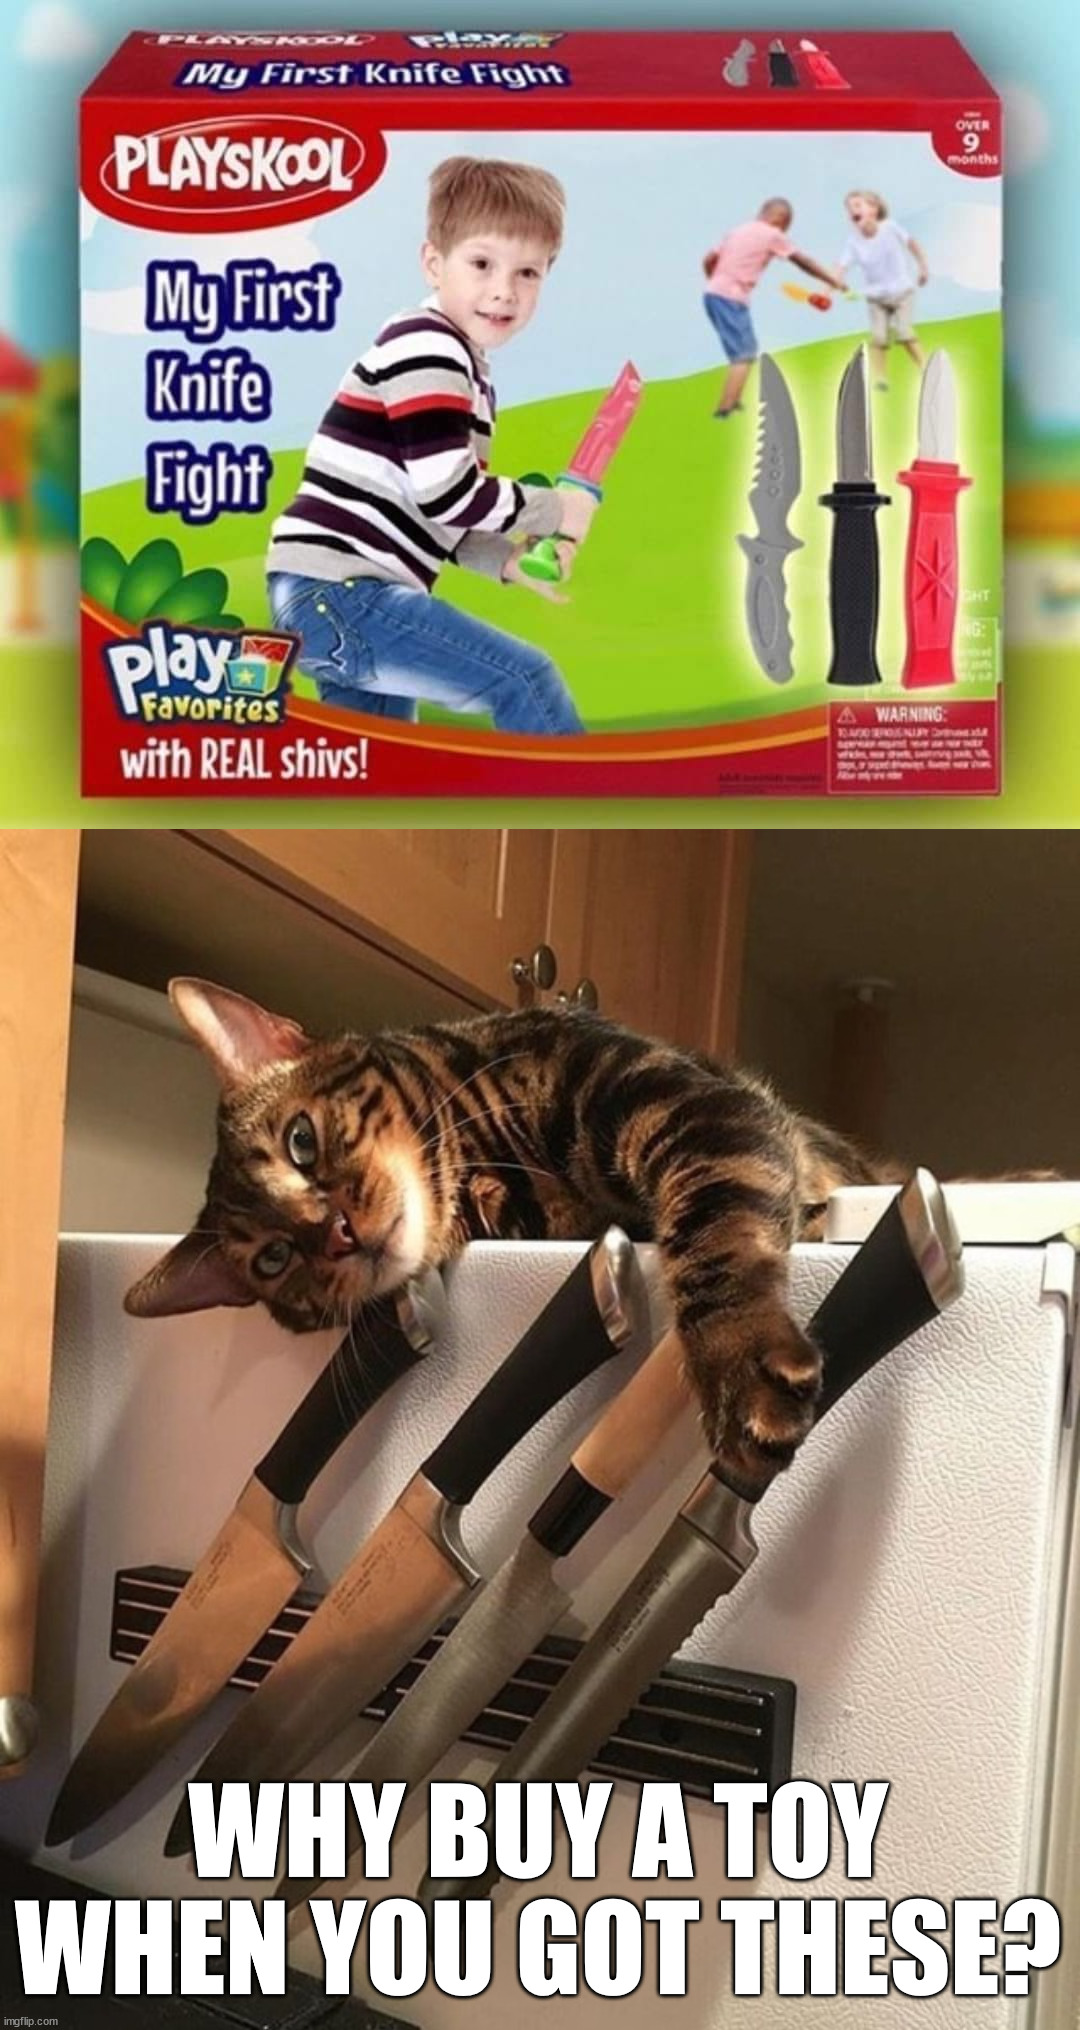 Train for future jailtime with the shivs | WHY BUY A TOY WHEN YOU GOT THESE? | image tagged in cat with knives,fake,funny picture,not really,kids | made w/ Imgflip meme maker